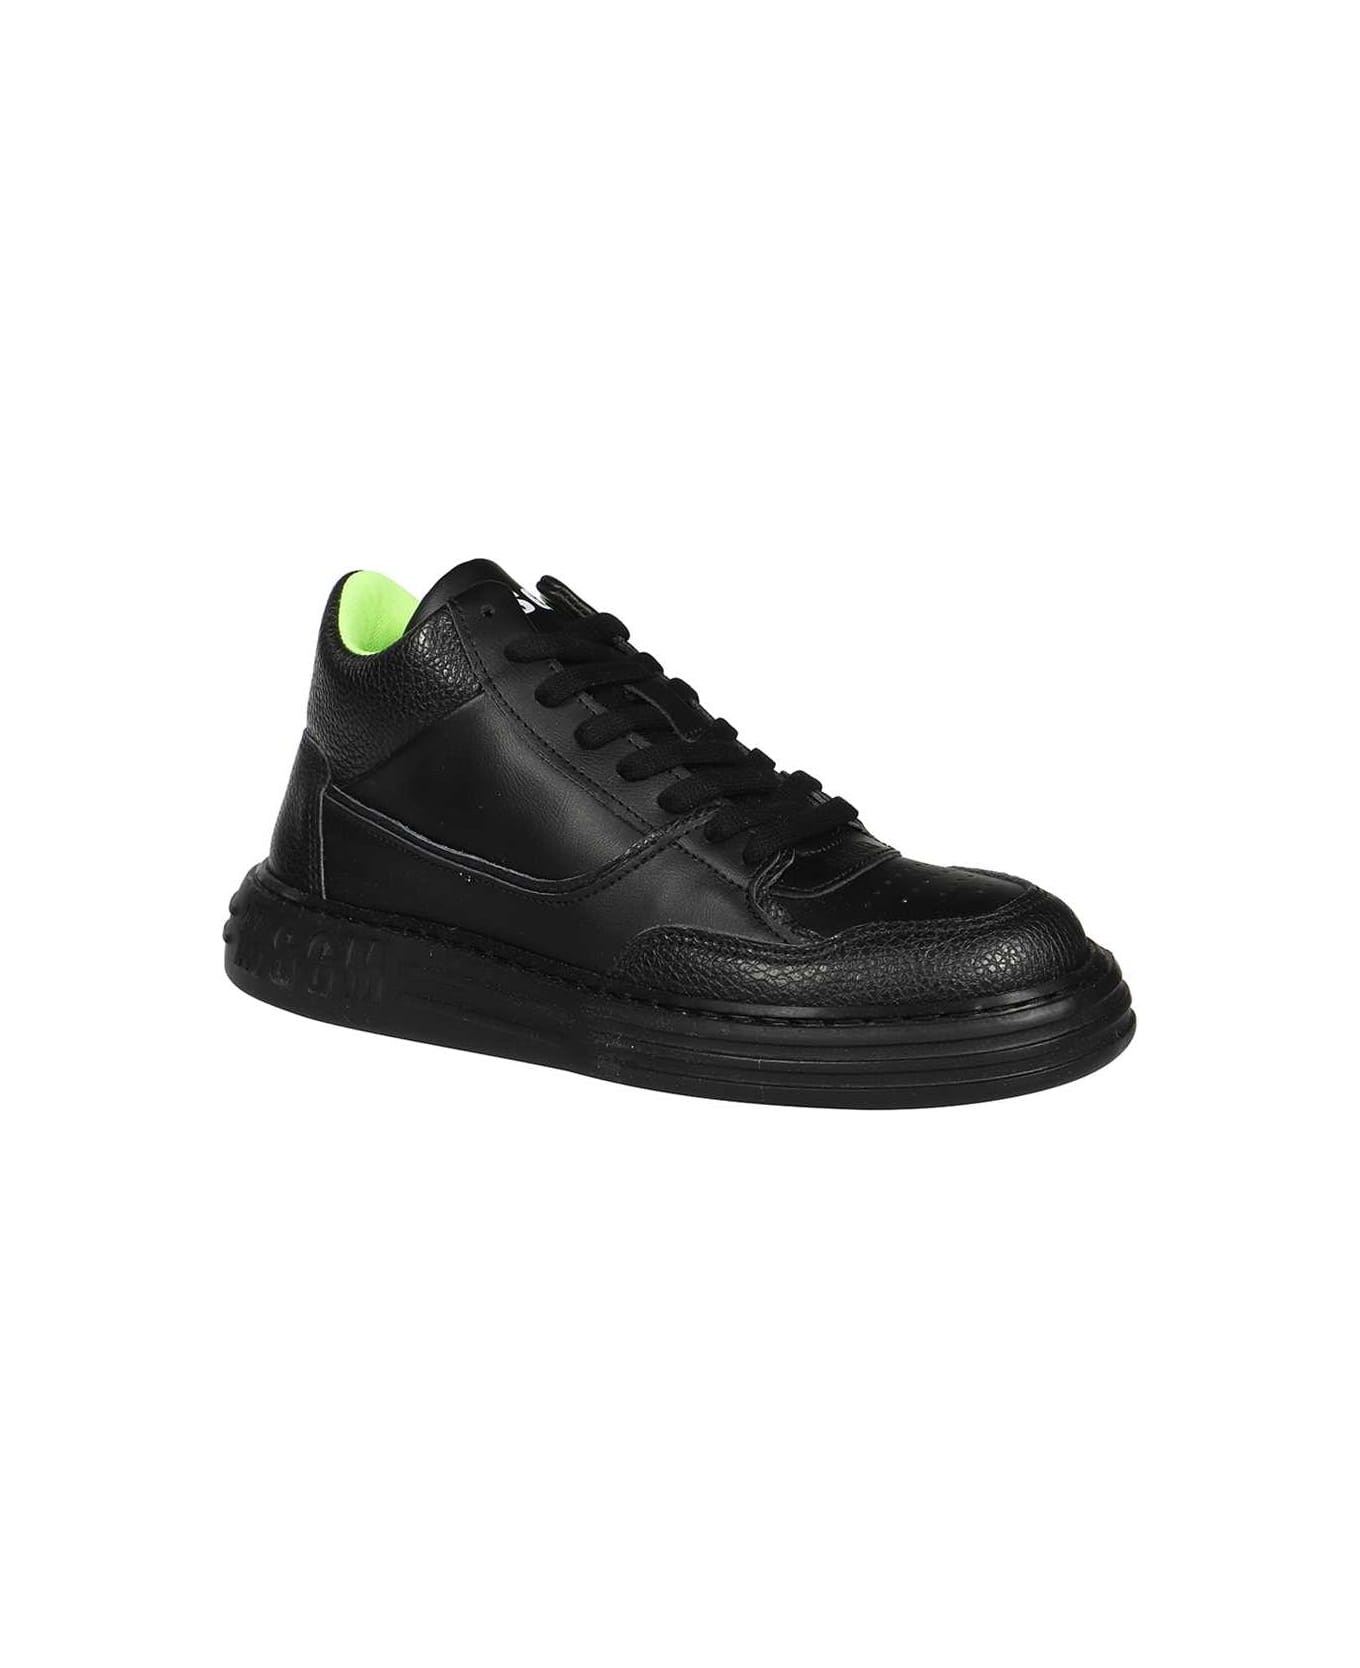 MSGM Leather Low Sneakers - black スニーカー